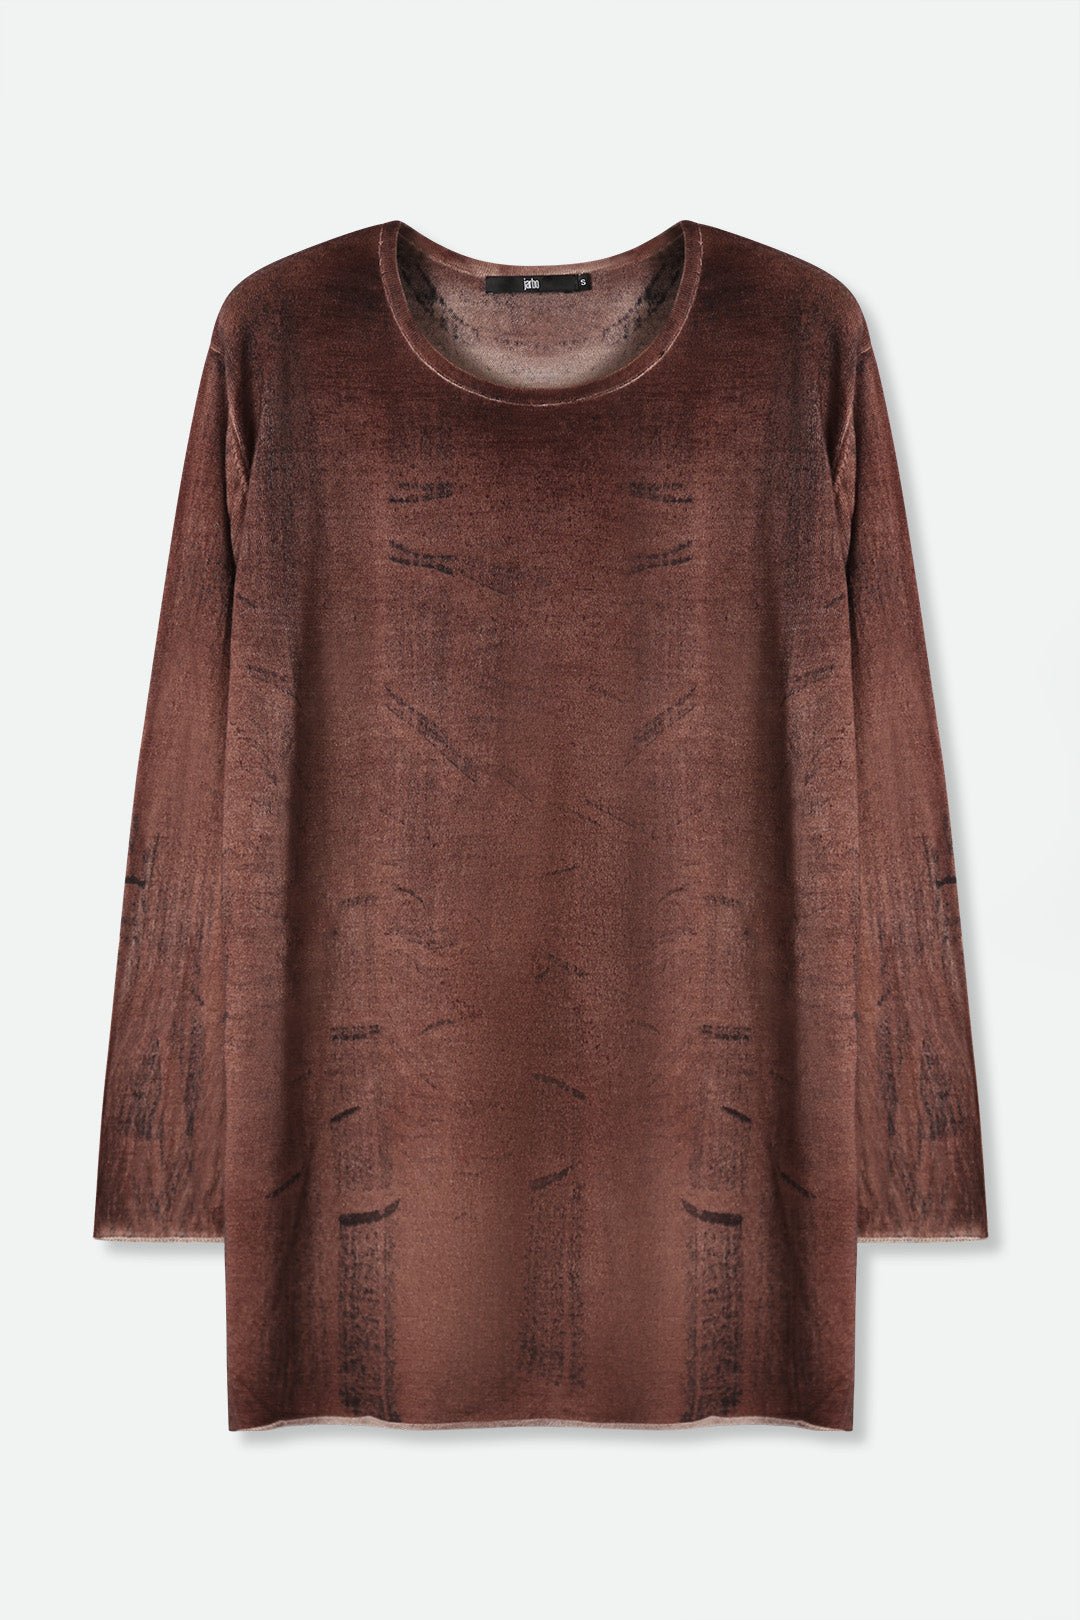 MARIANA IN HAND-DYED LIGHTWEIGHT CASHMERE PAINTED BROWN - Jarbo